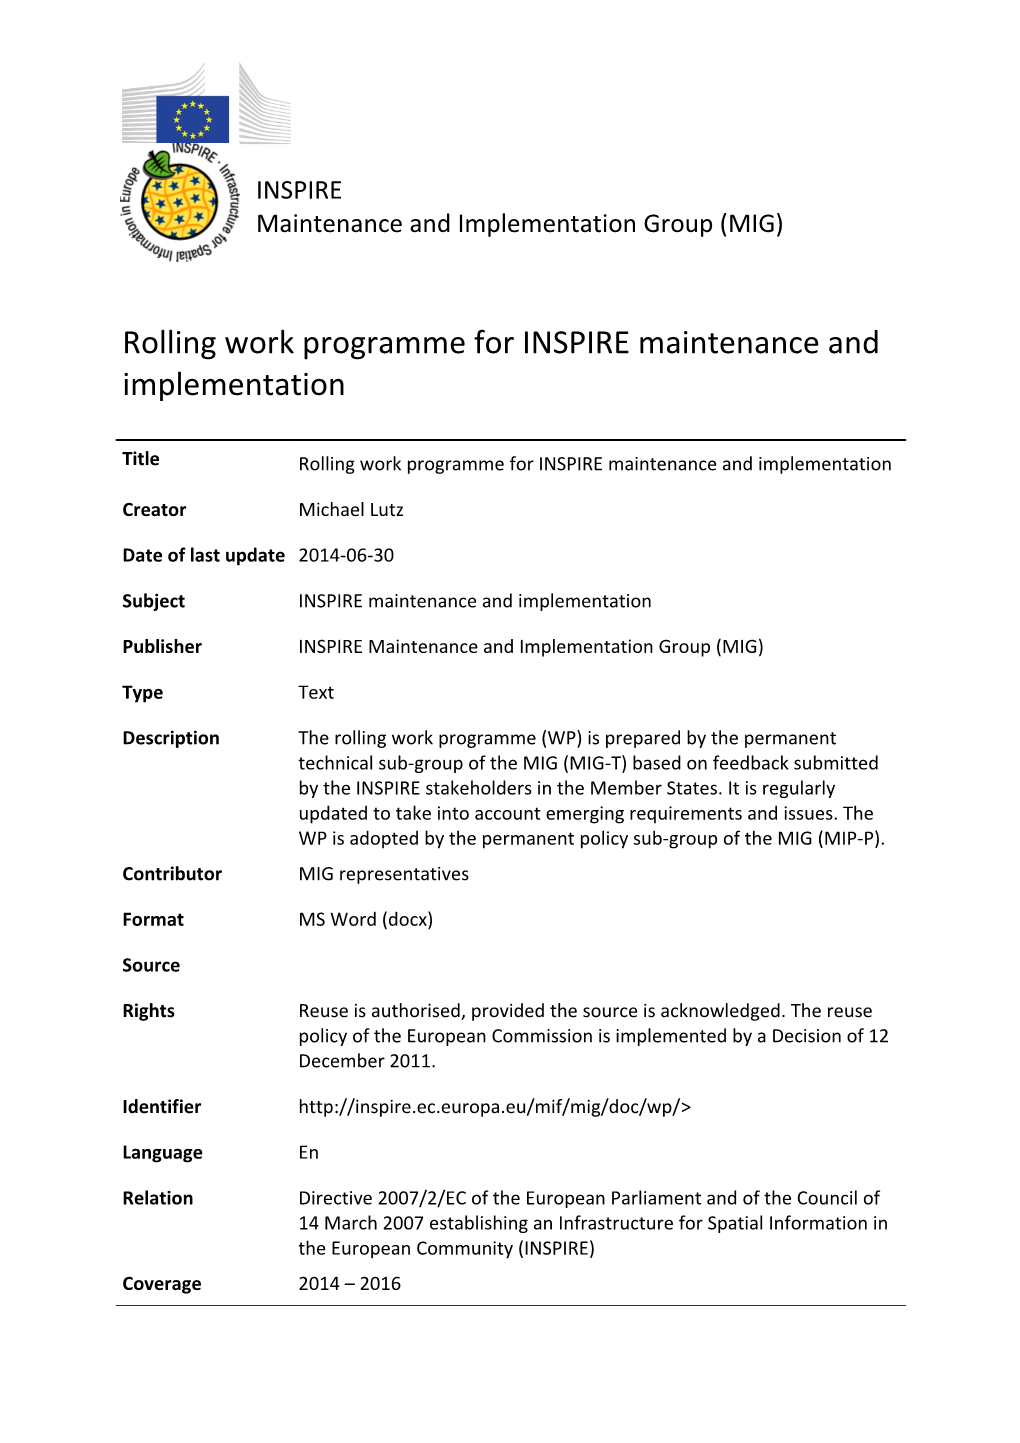 INSPIRE MIG Rolling Work Programme for INSPIRE Maintenance and Implementation